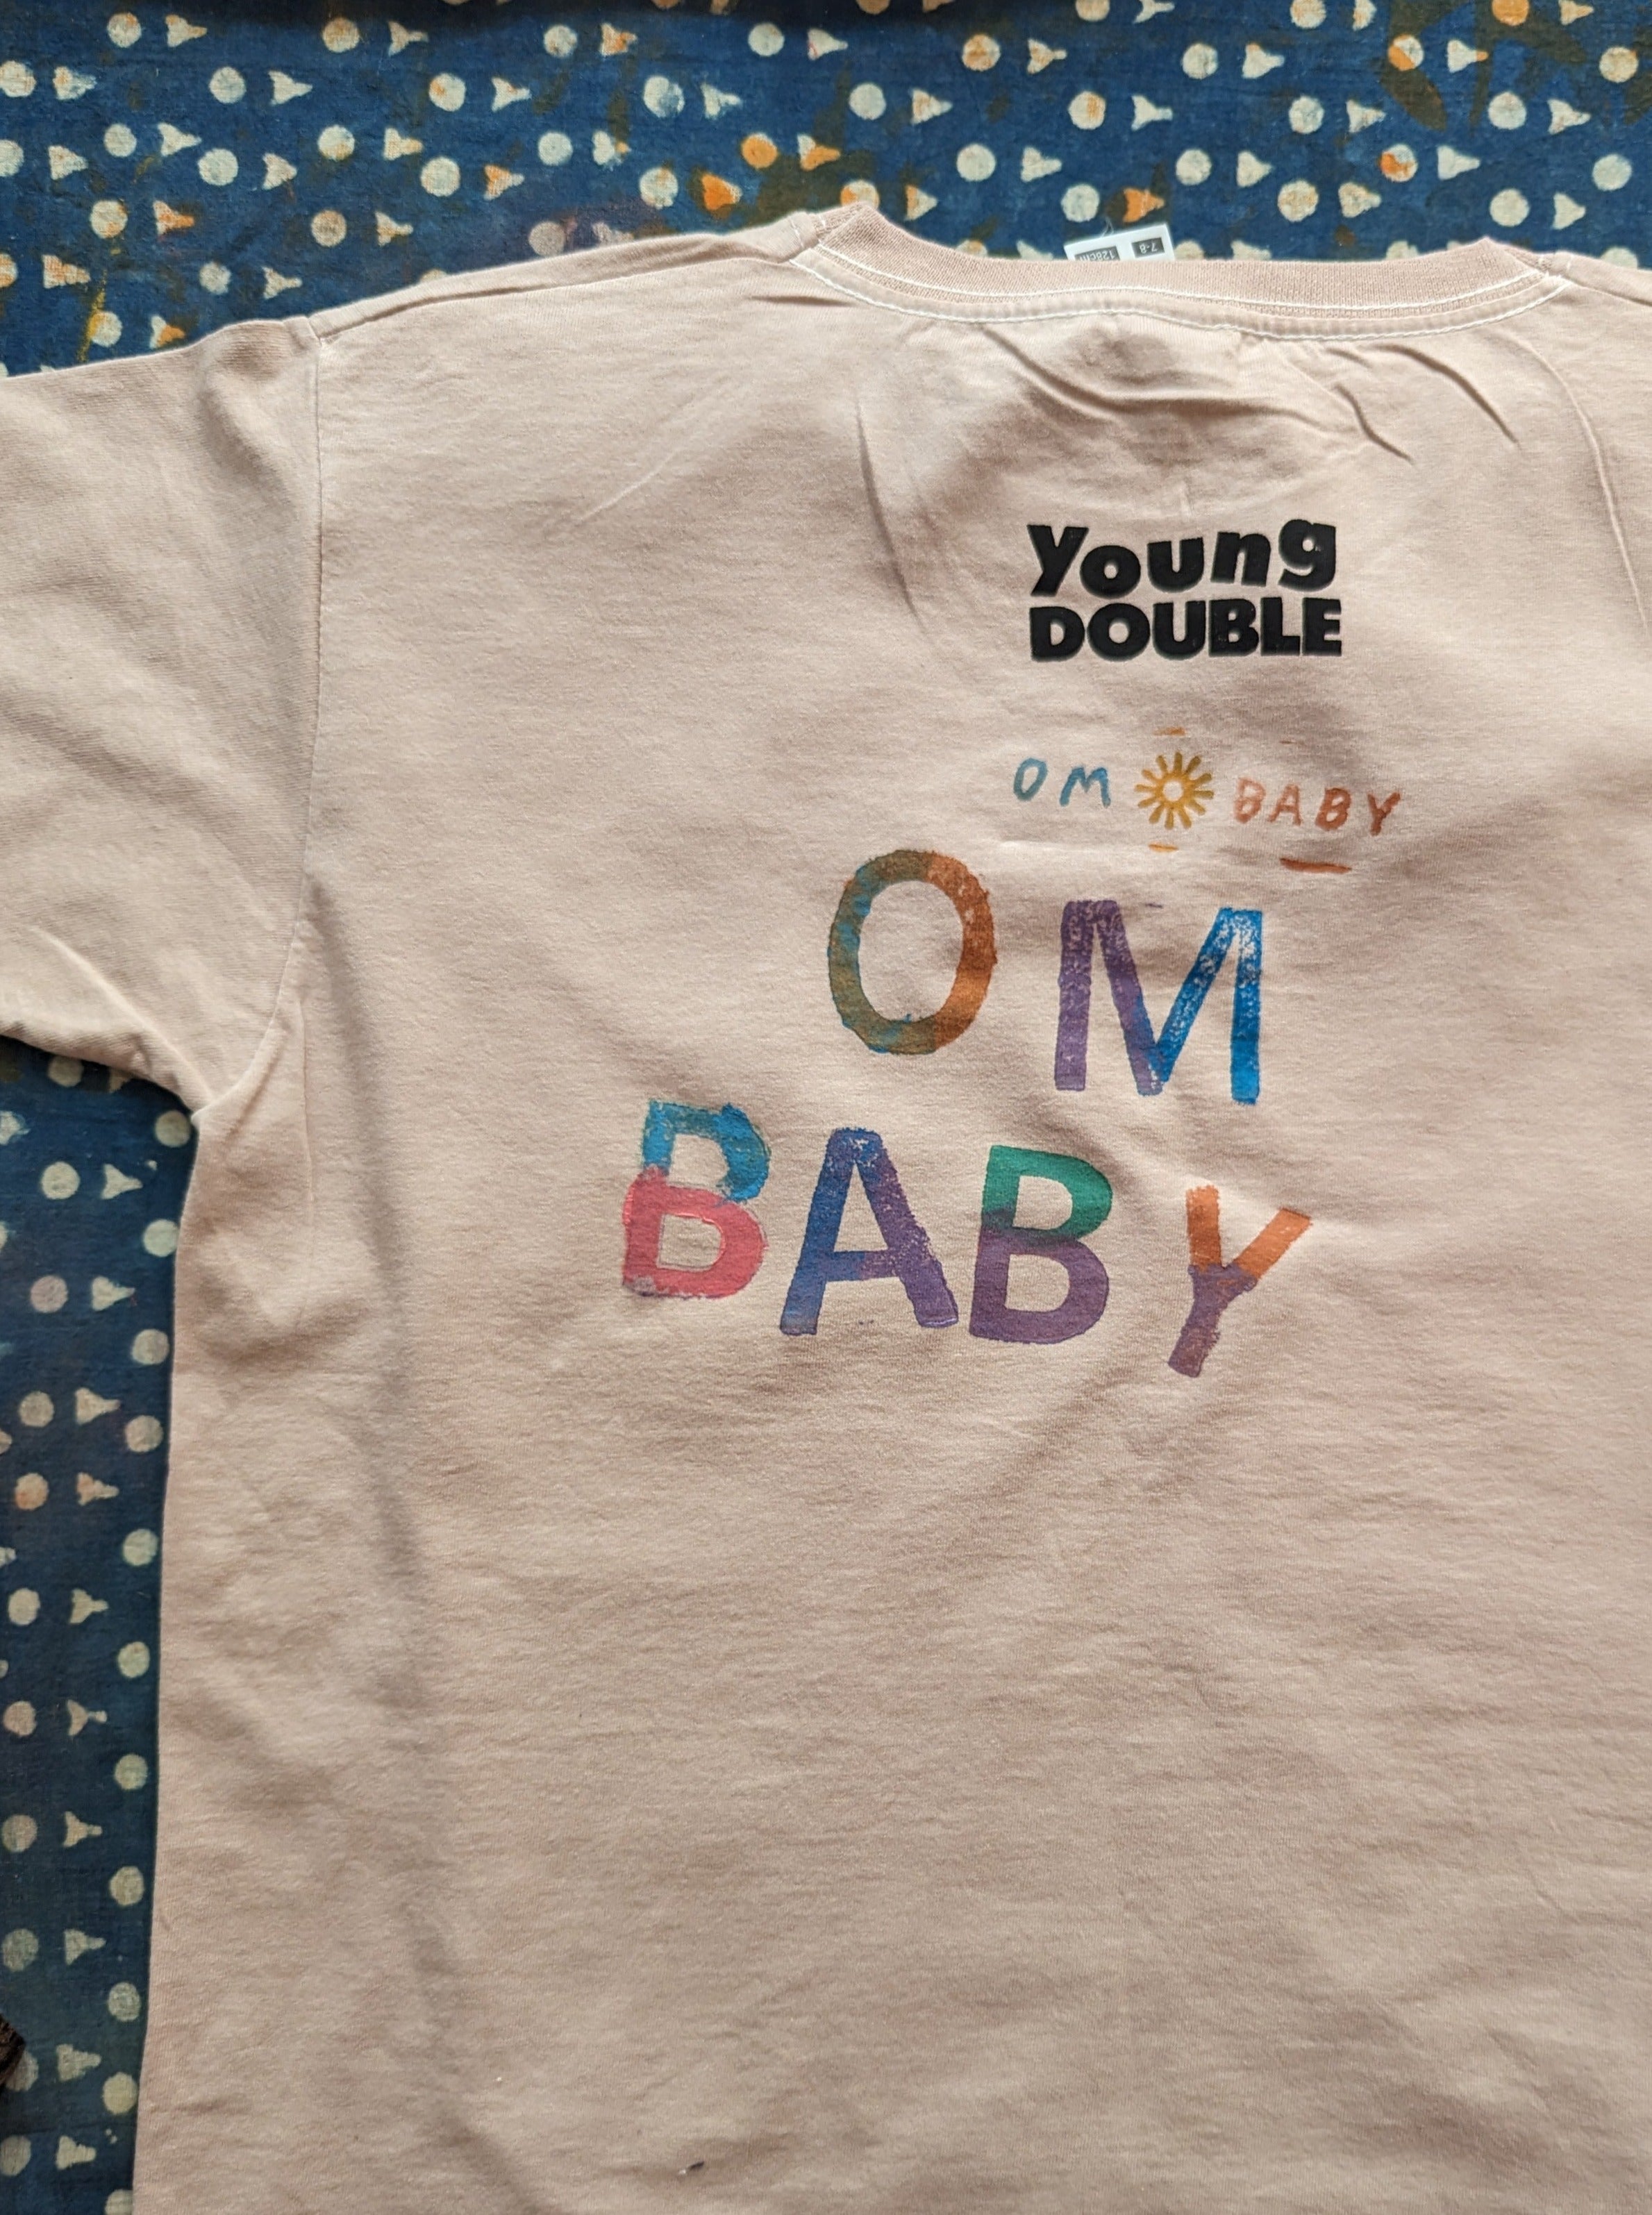 Om Baby X Young Double Block printing workshop 9th December